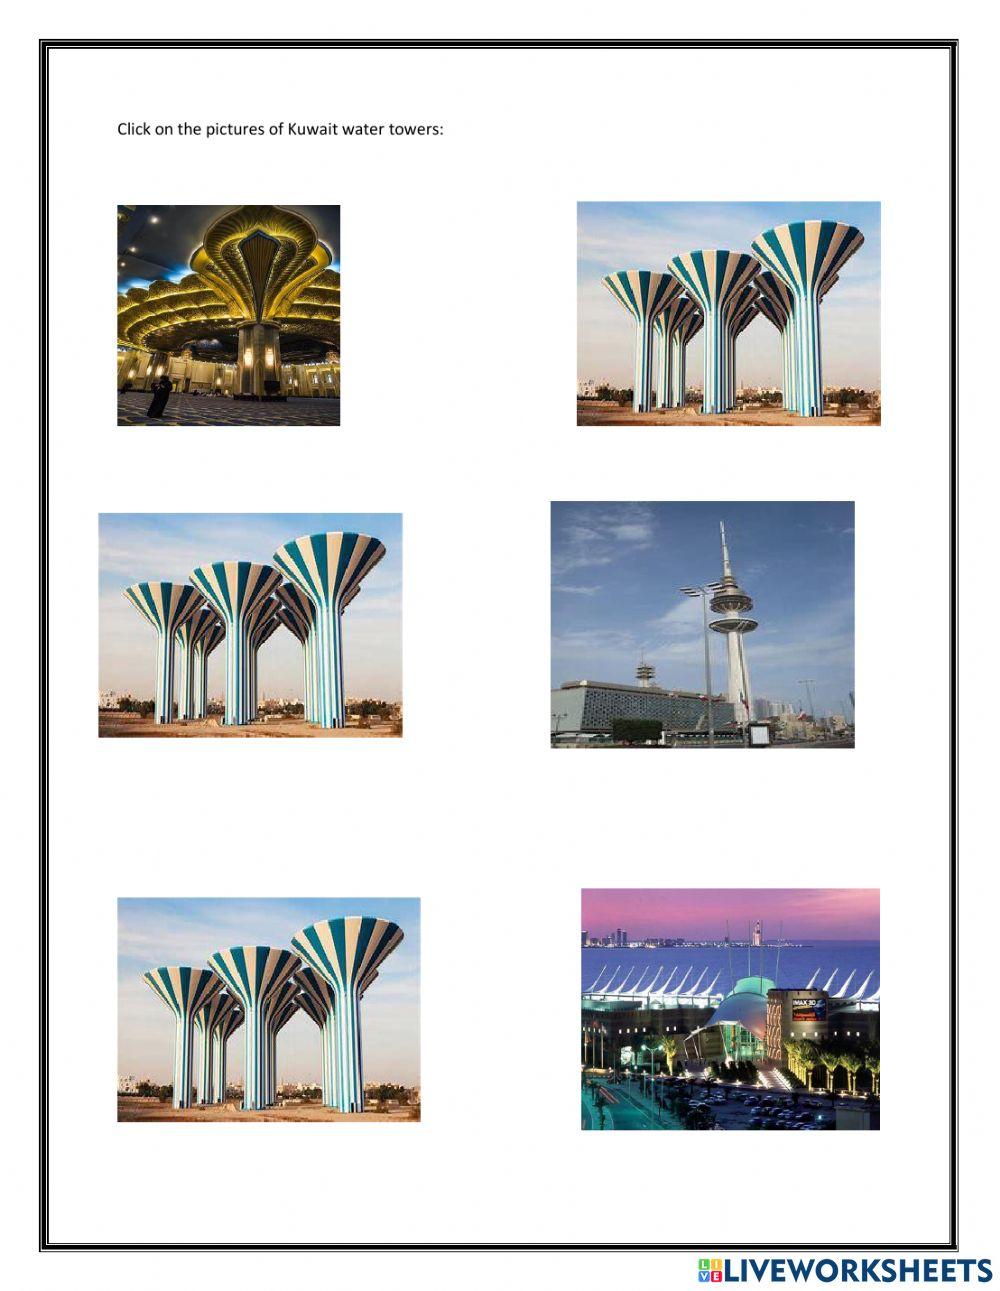 Select the pictures of Kuwait water towers